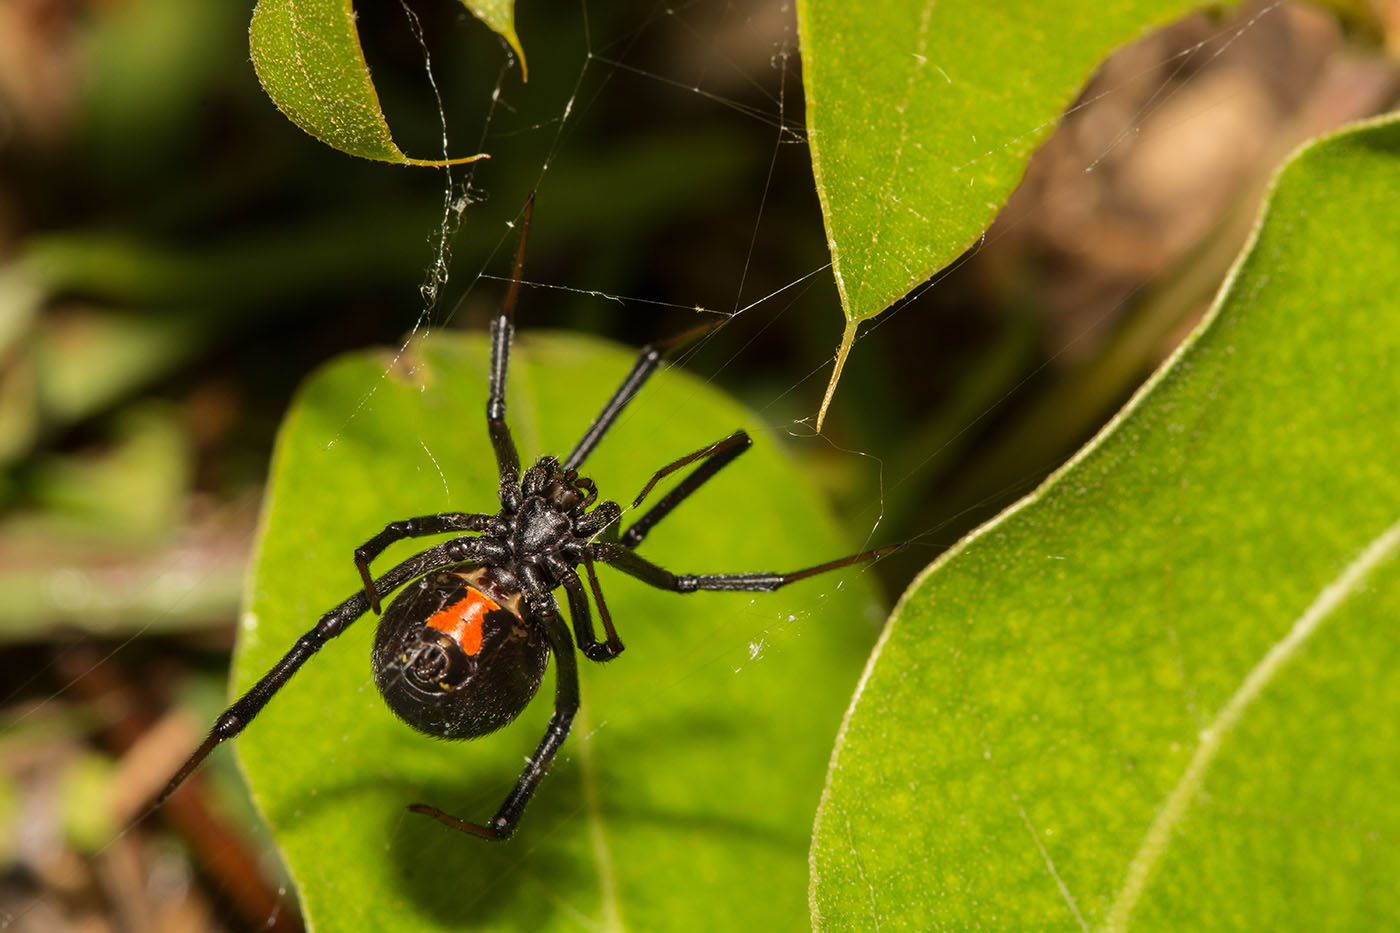 A black widow spider - are you in need of spider pest control in Waco, {fran_stat_abbrev}? Contact {fran_dba today!